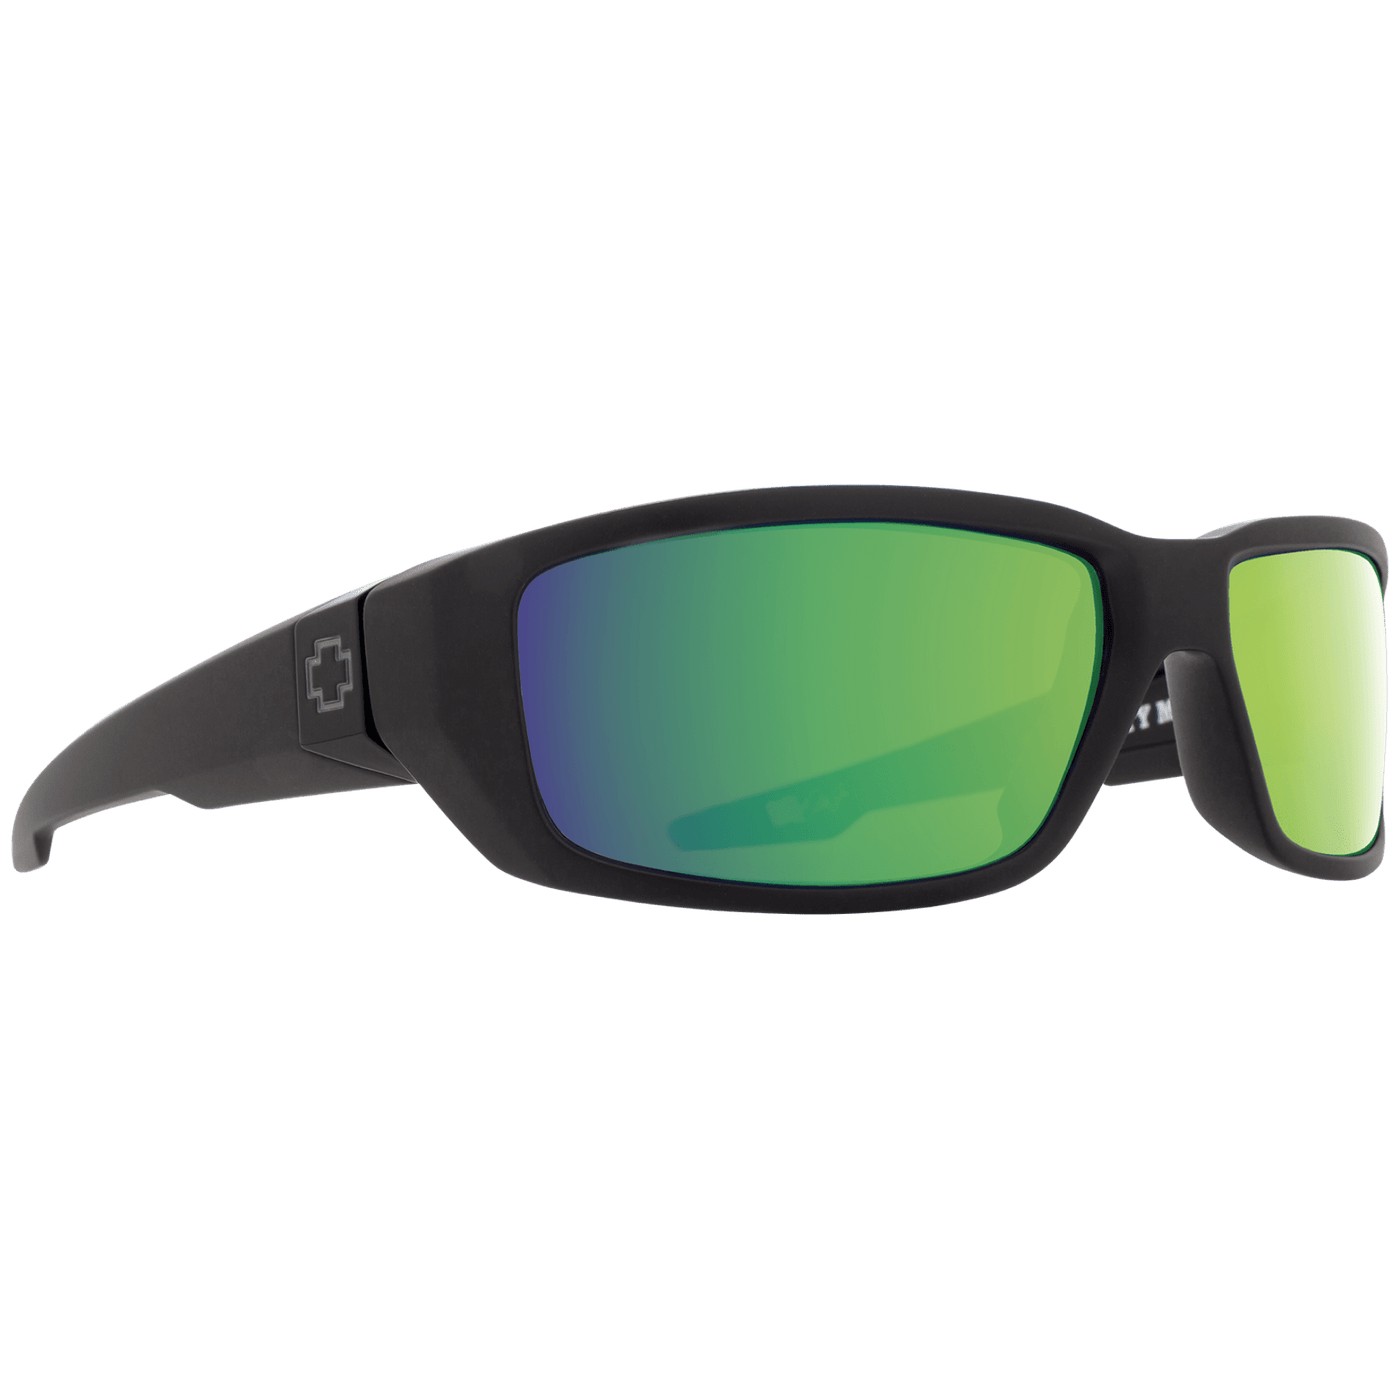 SPY DIRTY MO Polarized Sunglasses - Green/Soft Matte Black 8Lines Shop - Fast Shipping